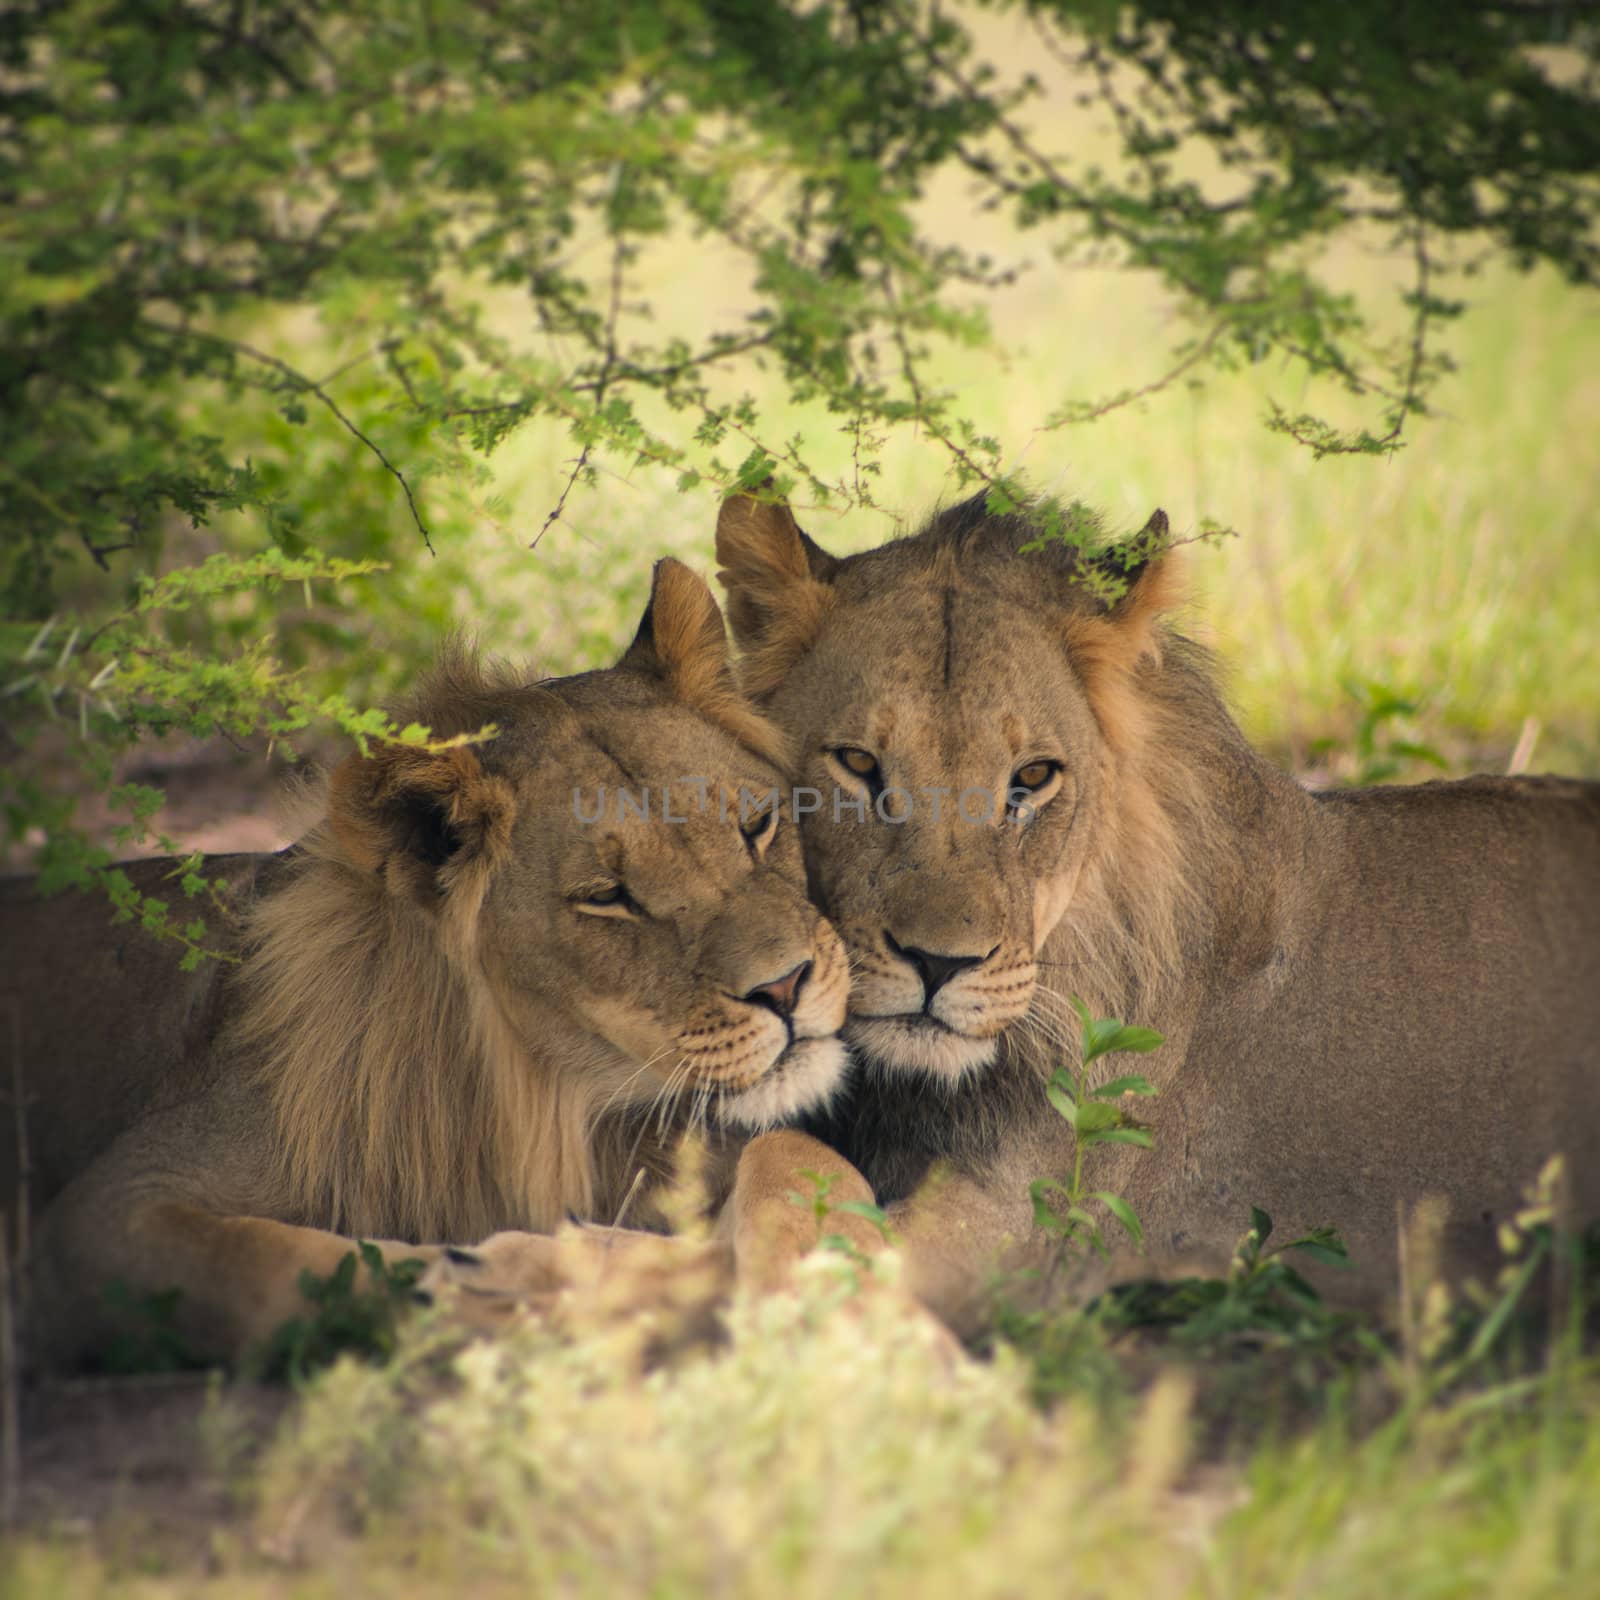 Loving pair of lion and lioness by watchtheworld